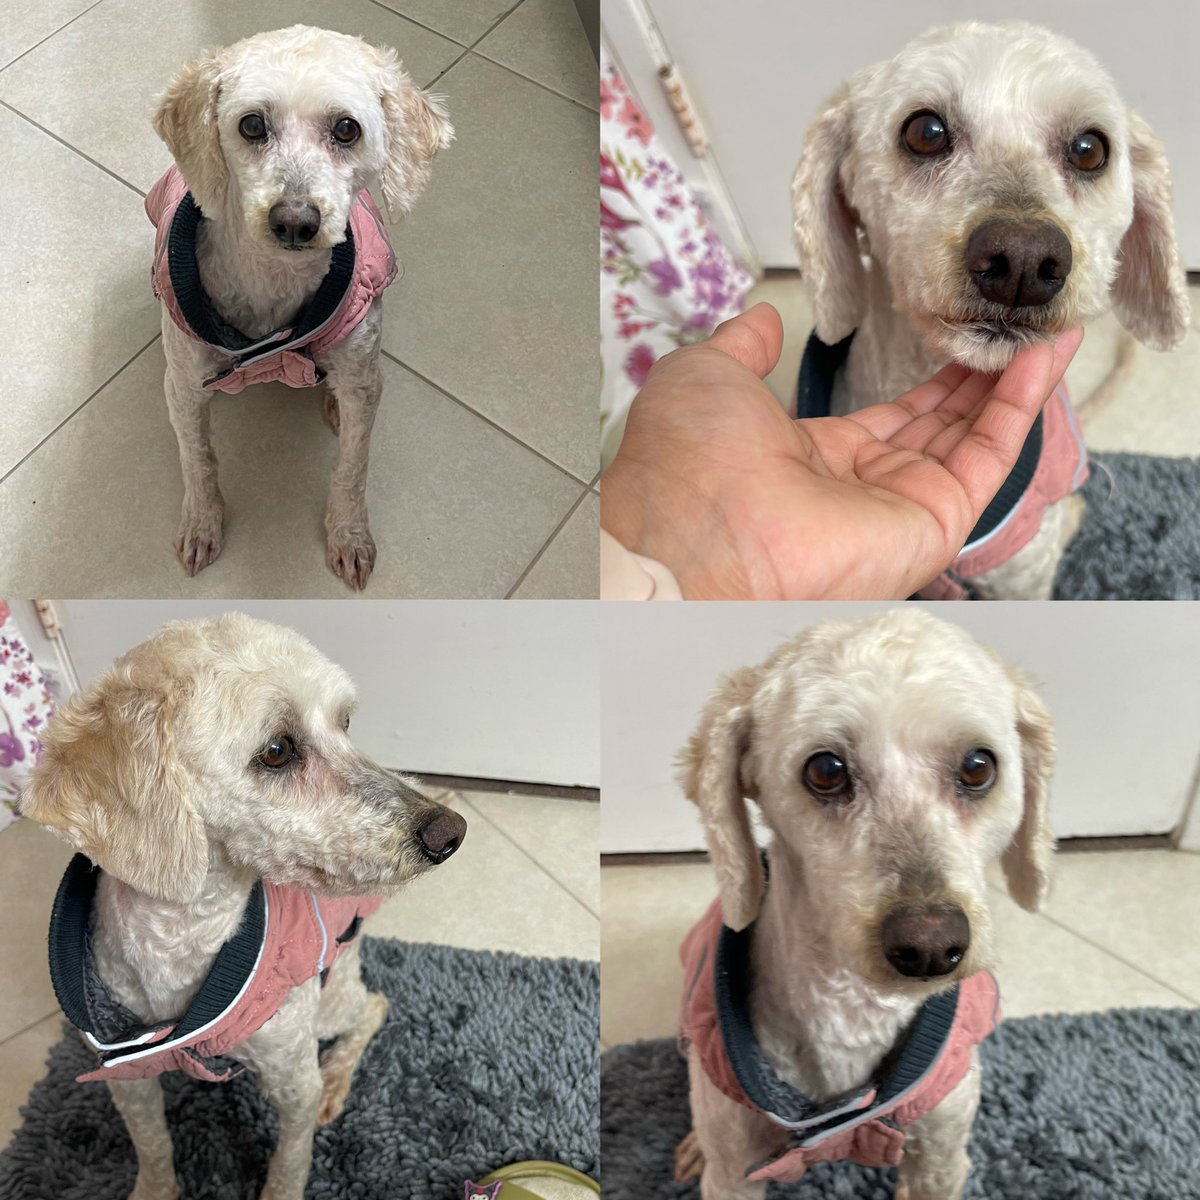 please share 🤍
looking for a good home for juliet
female about 10 years of age
very sweet girl, well behaved with lots of love to give 

dm me with any questions 

#ocpets #ocrescuedogs #orangecounty #santaanacalifornia #tustincalifornia #irvinecalifornia #dogrescue